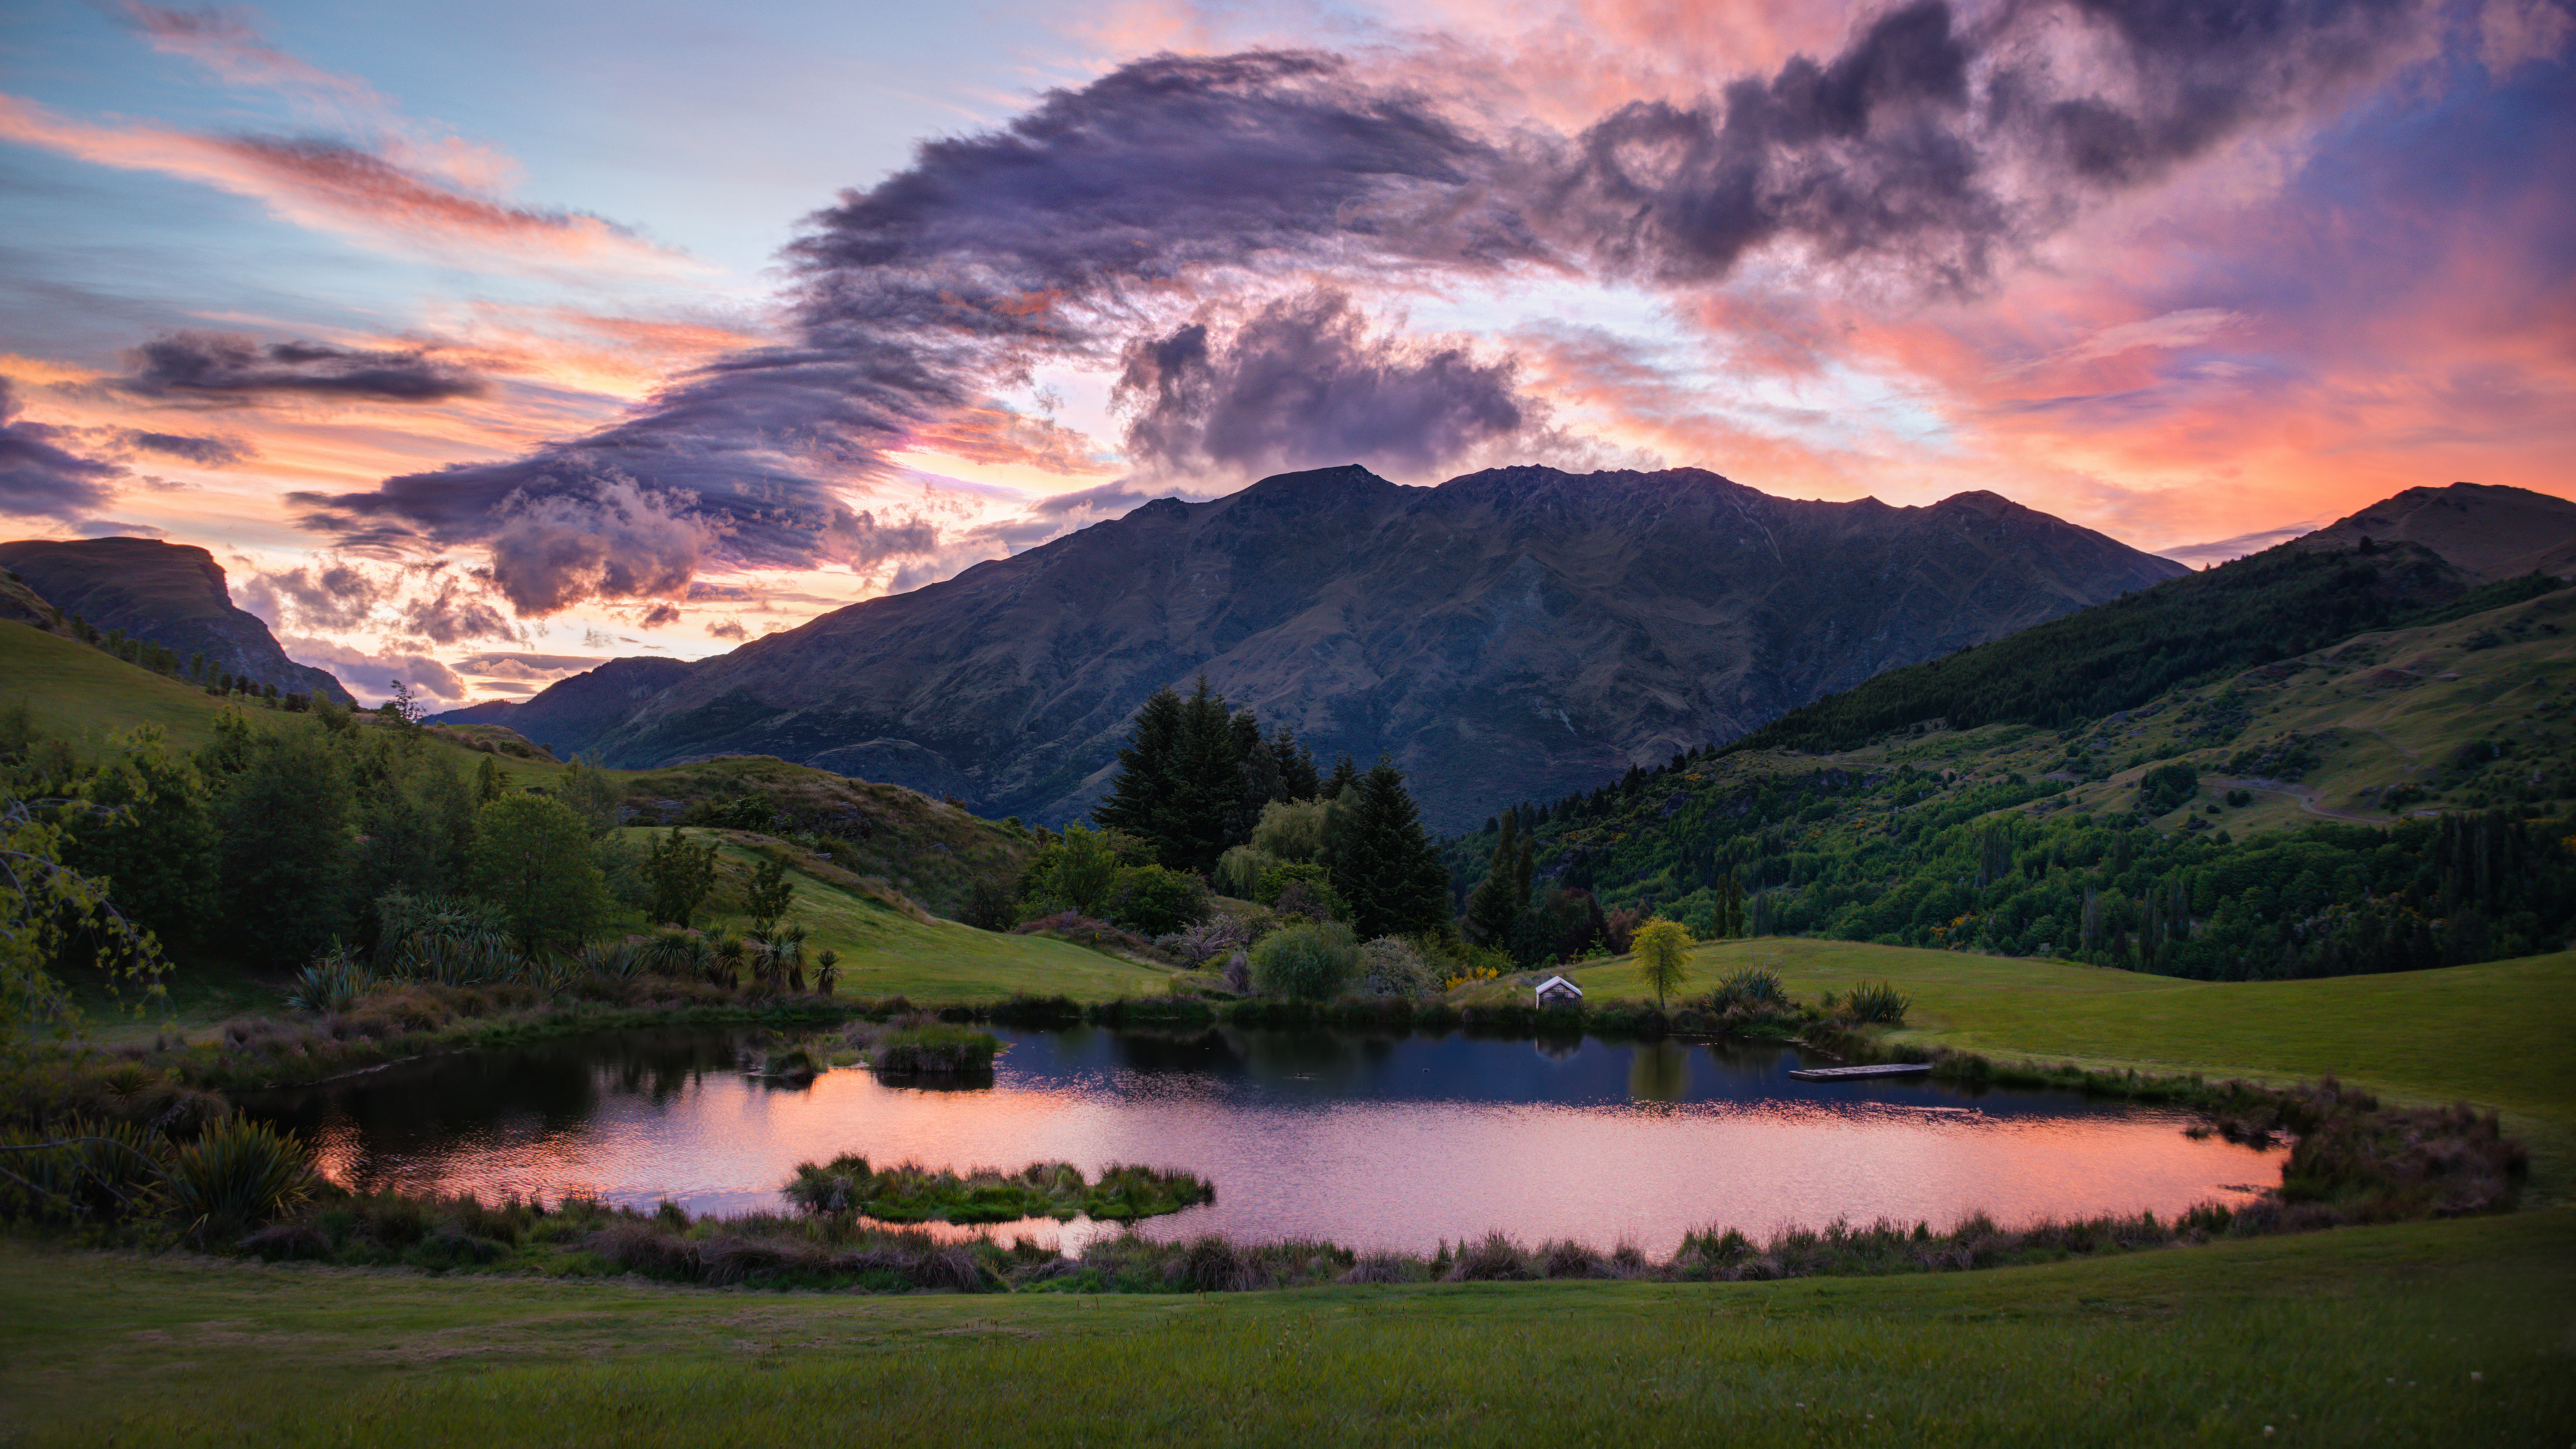 General 3840x2160 landscape 4K New Zealand nature mountains clouds lake water trees sunset glow